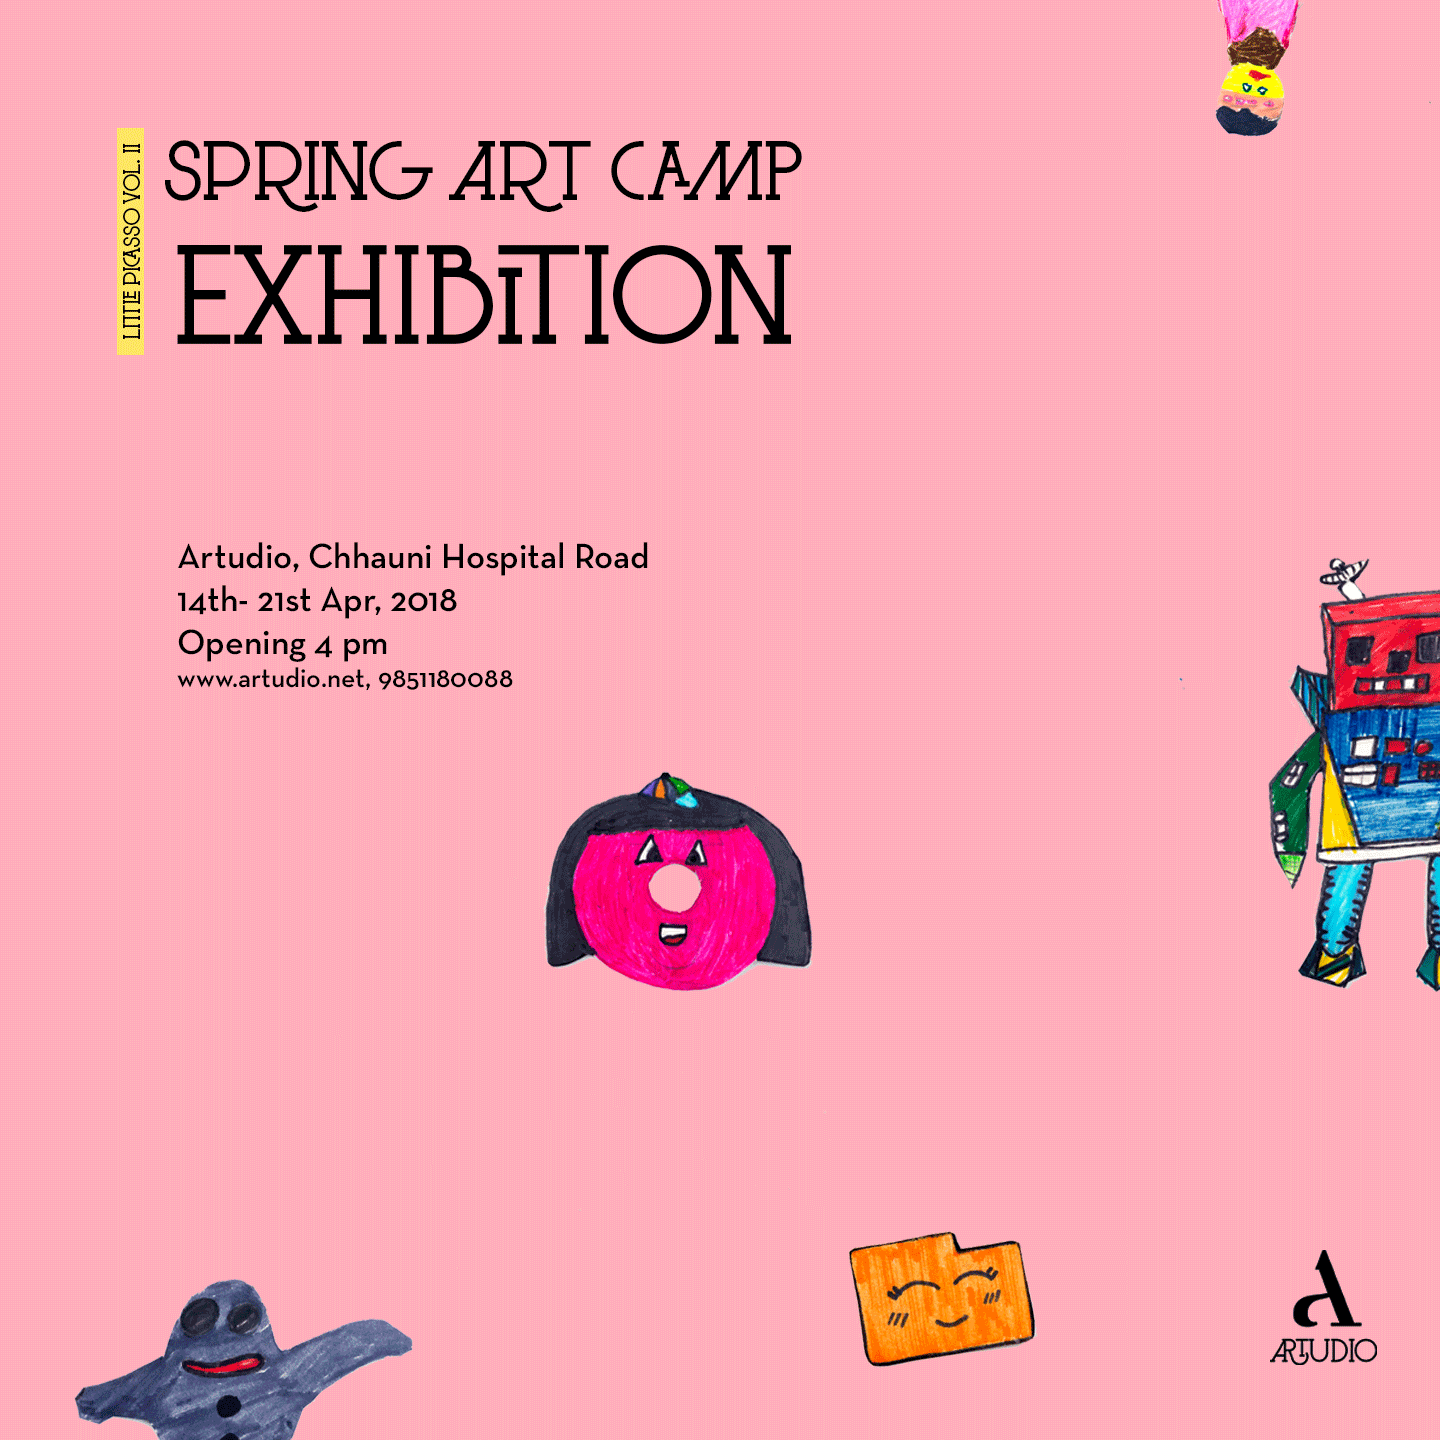 Little Picasso Vol 11: Spring Art Camp Exhibition 2018 [Invitation] post thumbnail image